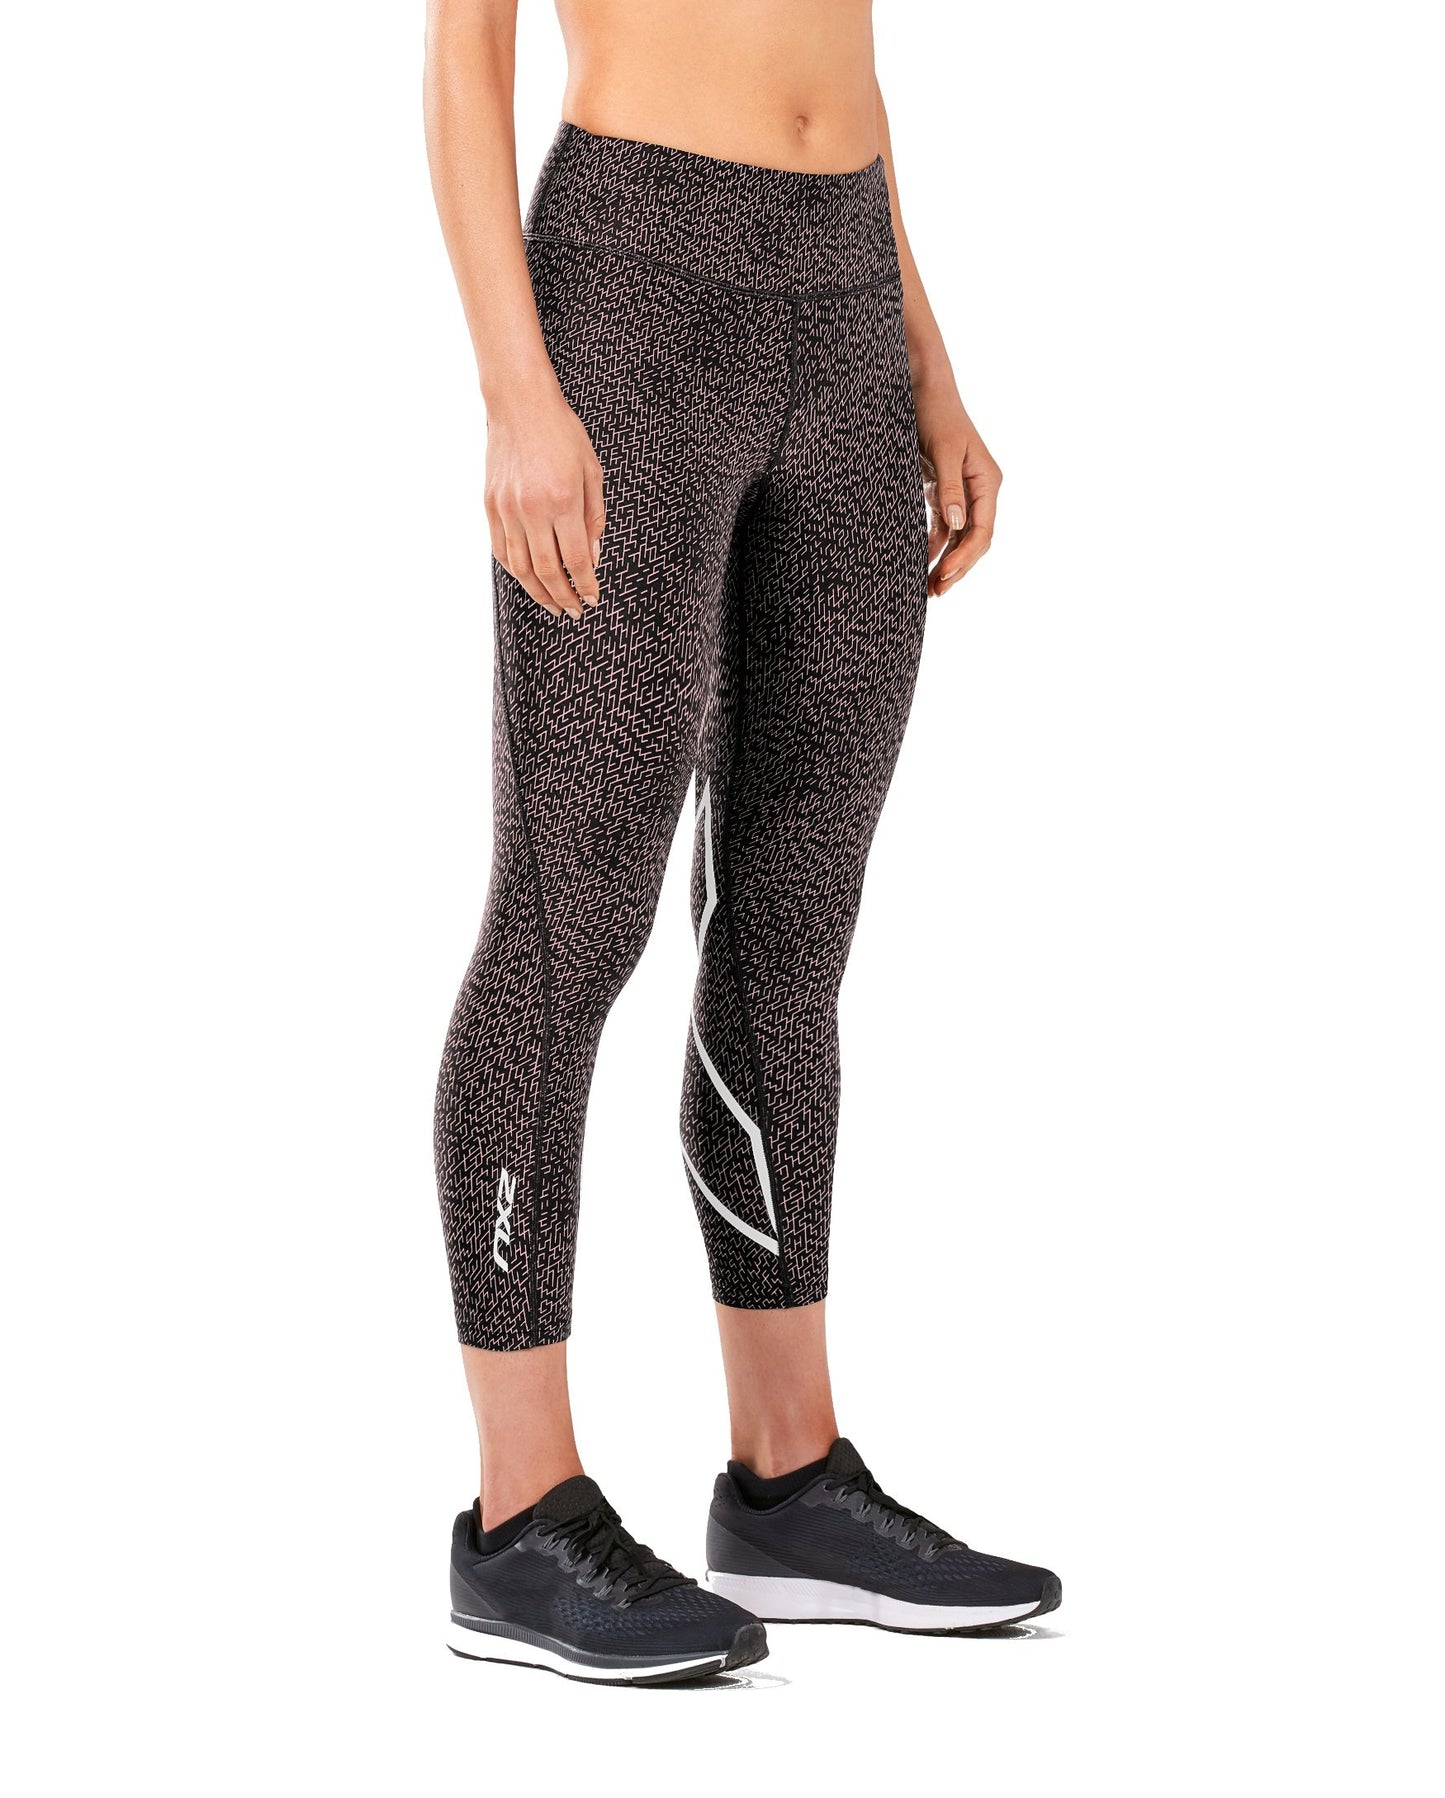 2XU Mid Rise 7/8 Compression Less Muscle Damage Legging